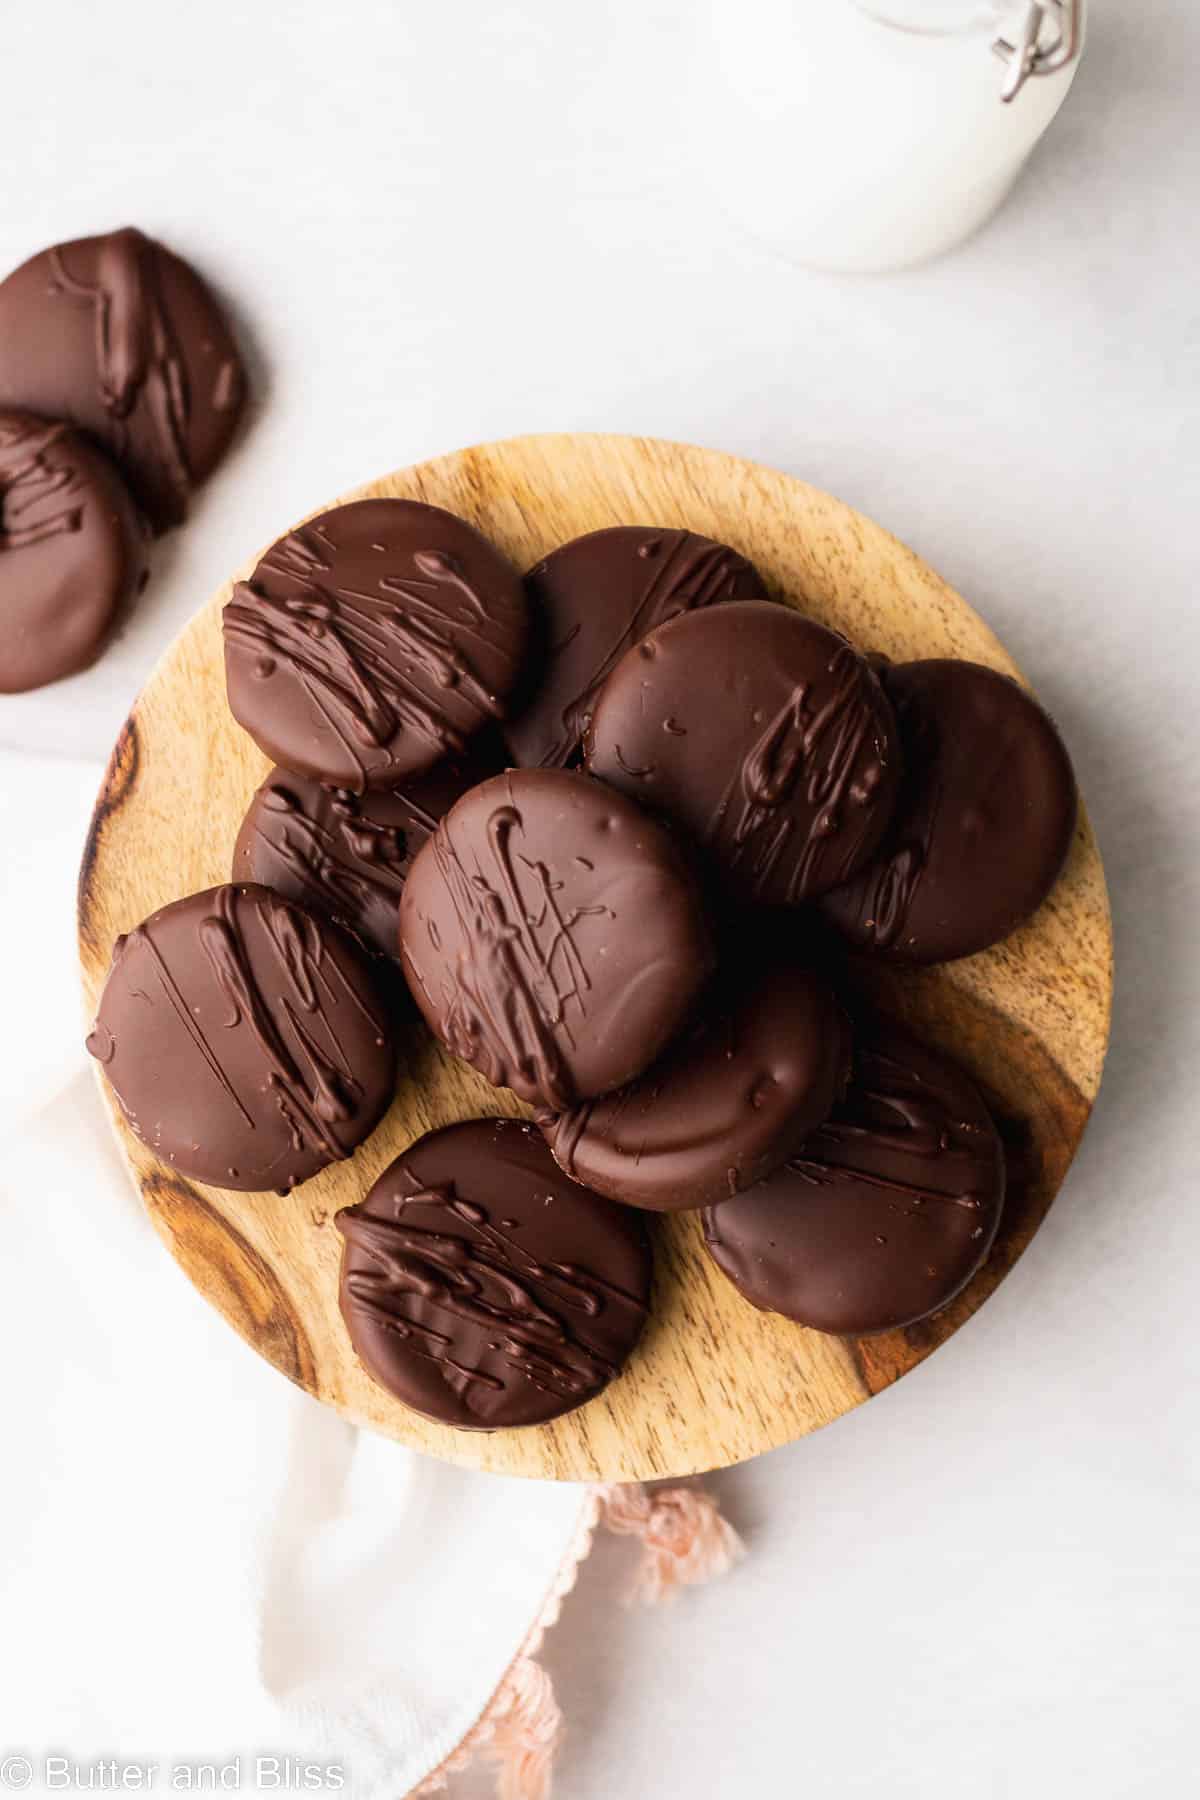 Small wooden plate full of gluten free chocolate covered chocolate cookies.